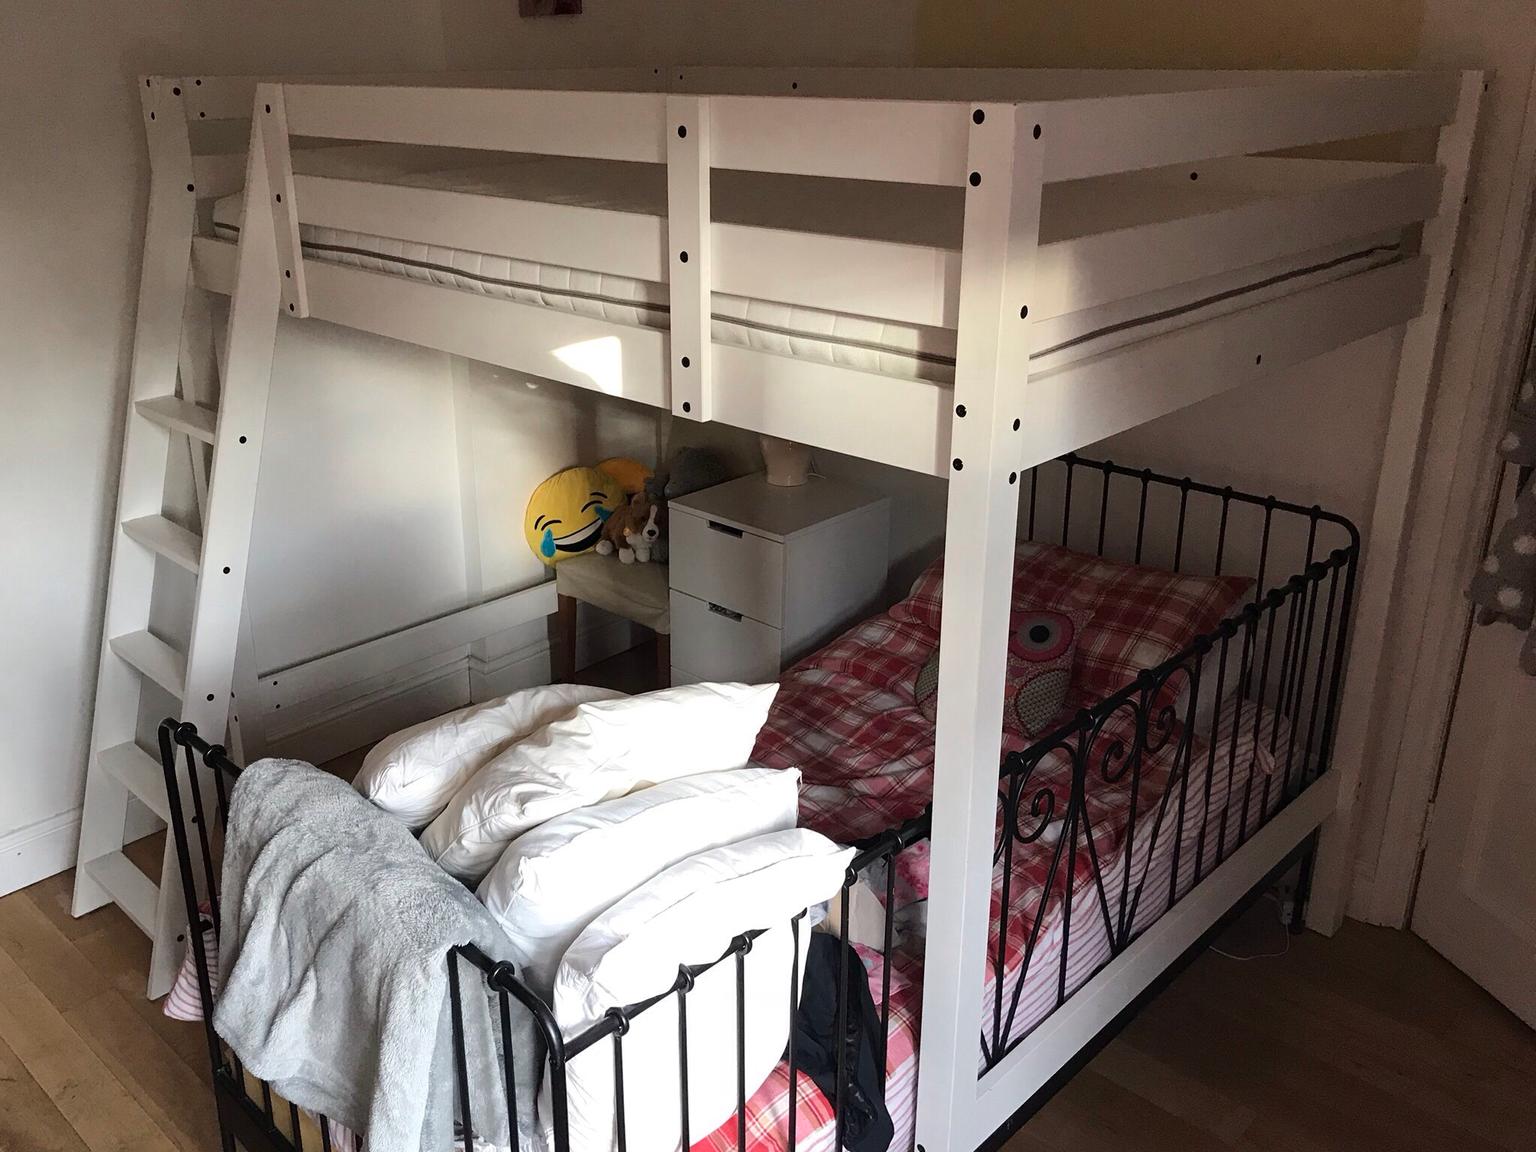 Ikea Stora Loft Bed Kids Bunk Sky Double Bed In Cr6 Warlingham For 150 00 For Sale Shpock